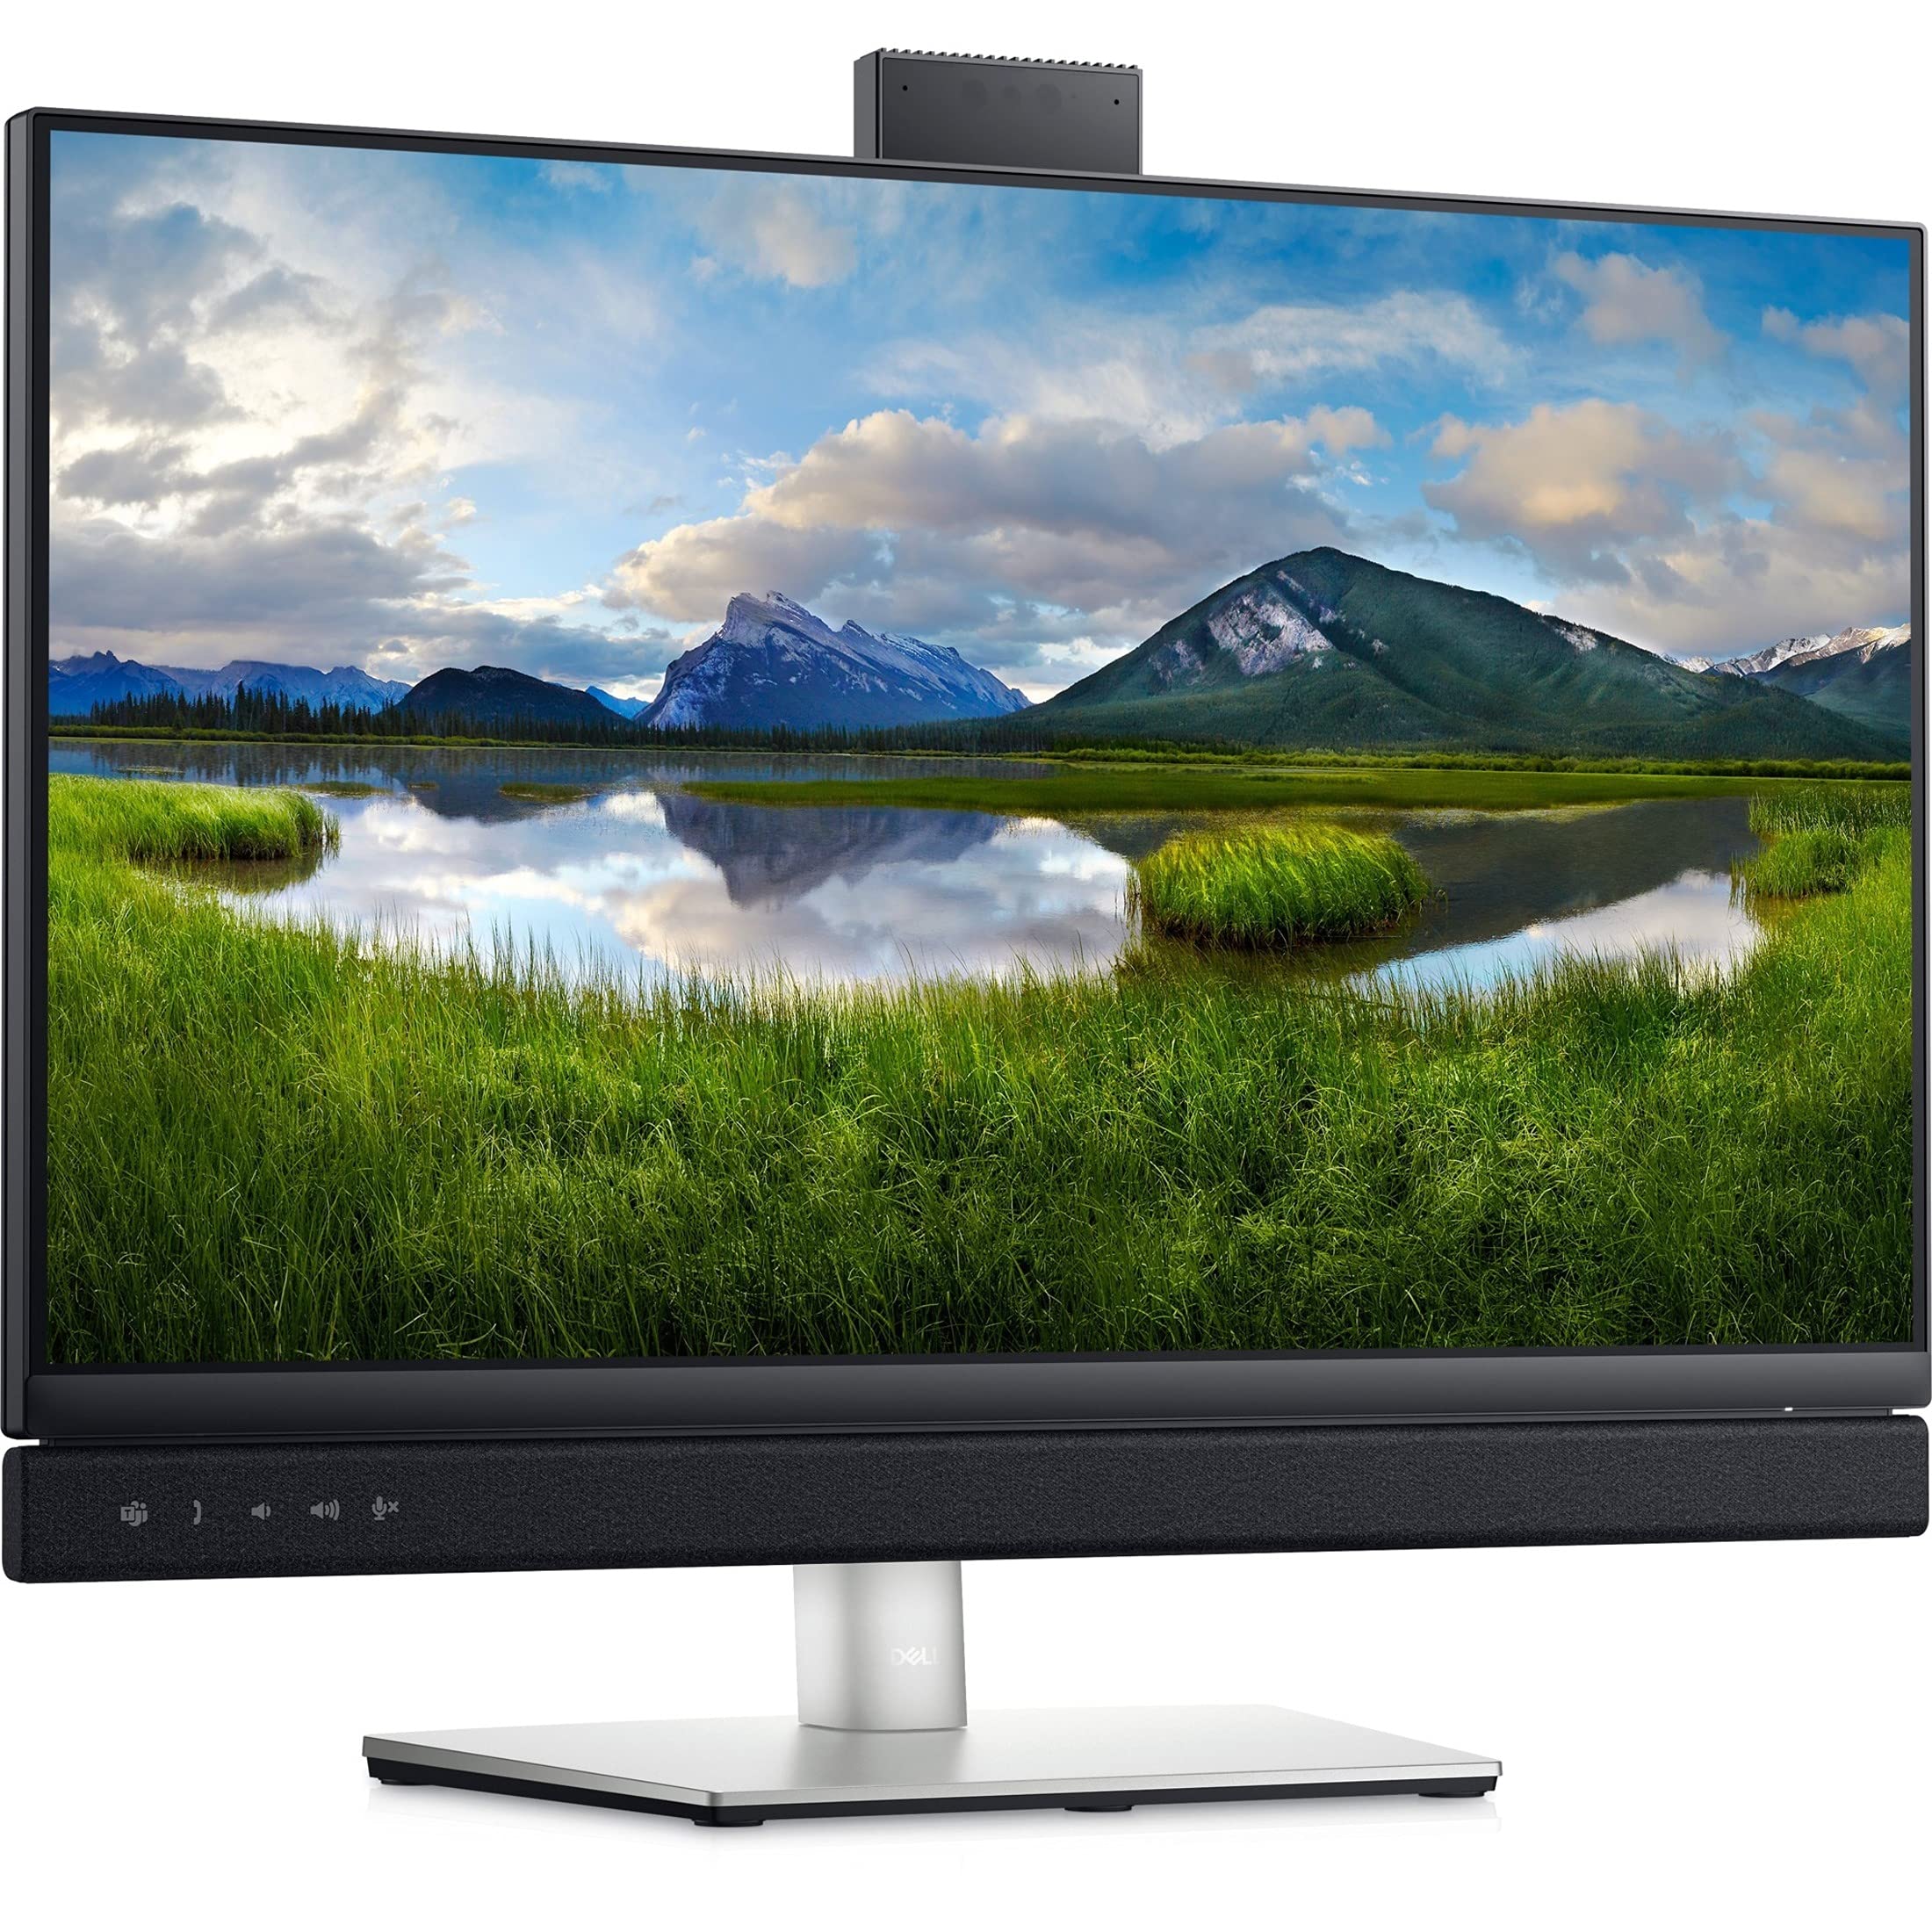 Dell Monitor With Camera Not Working